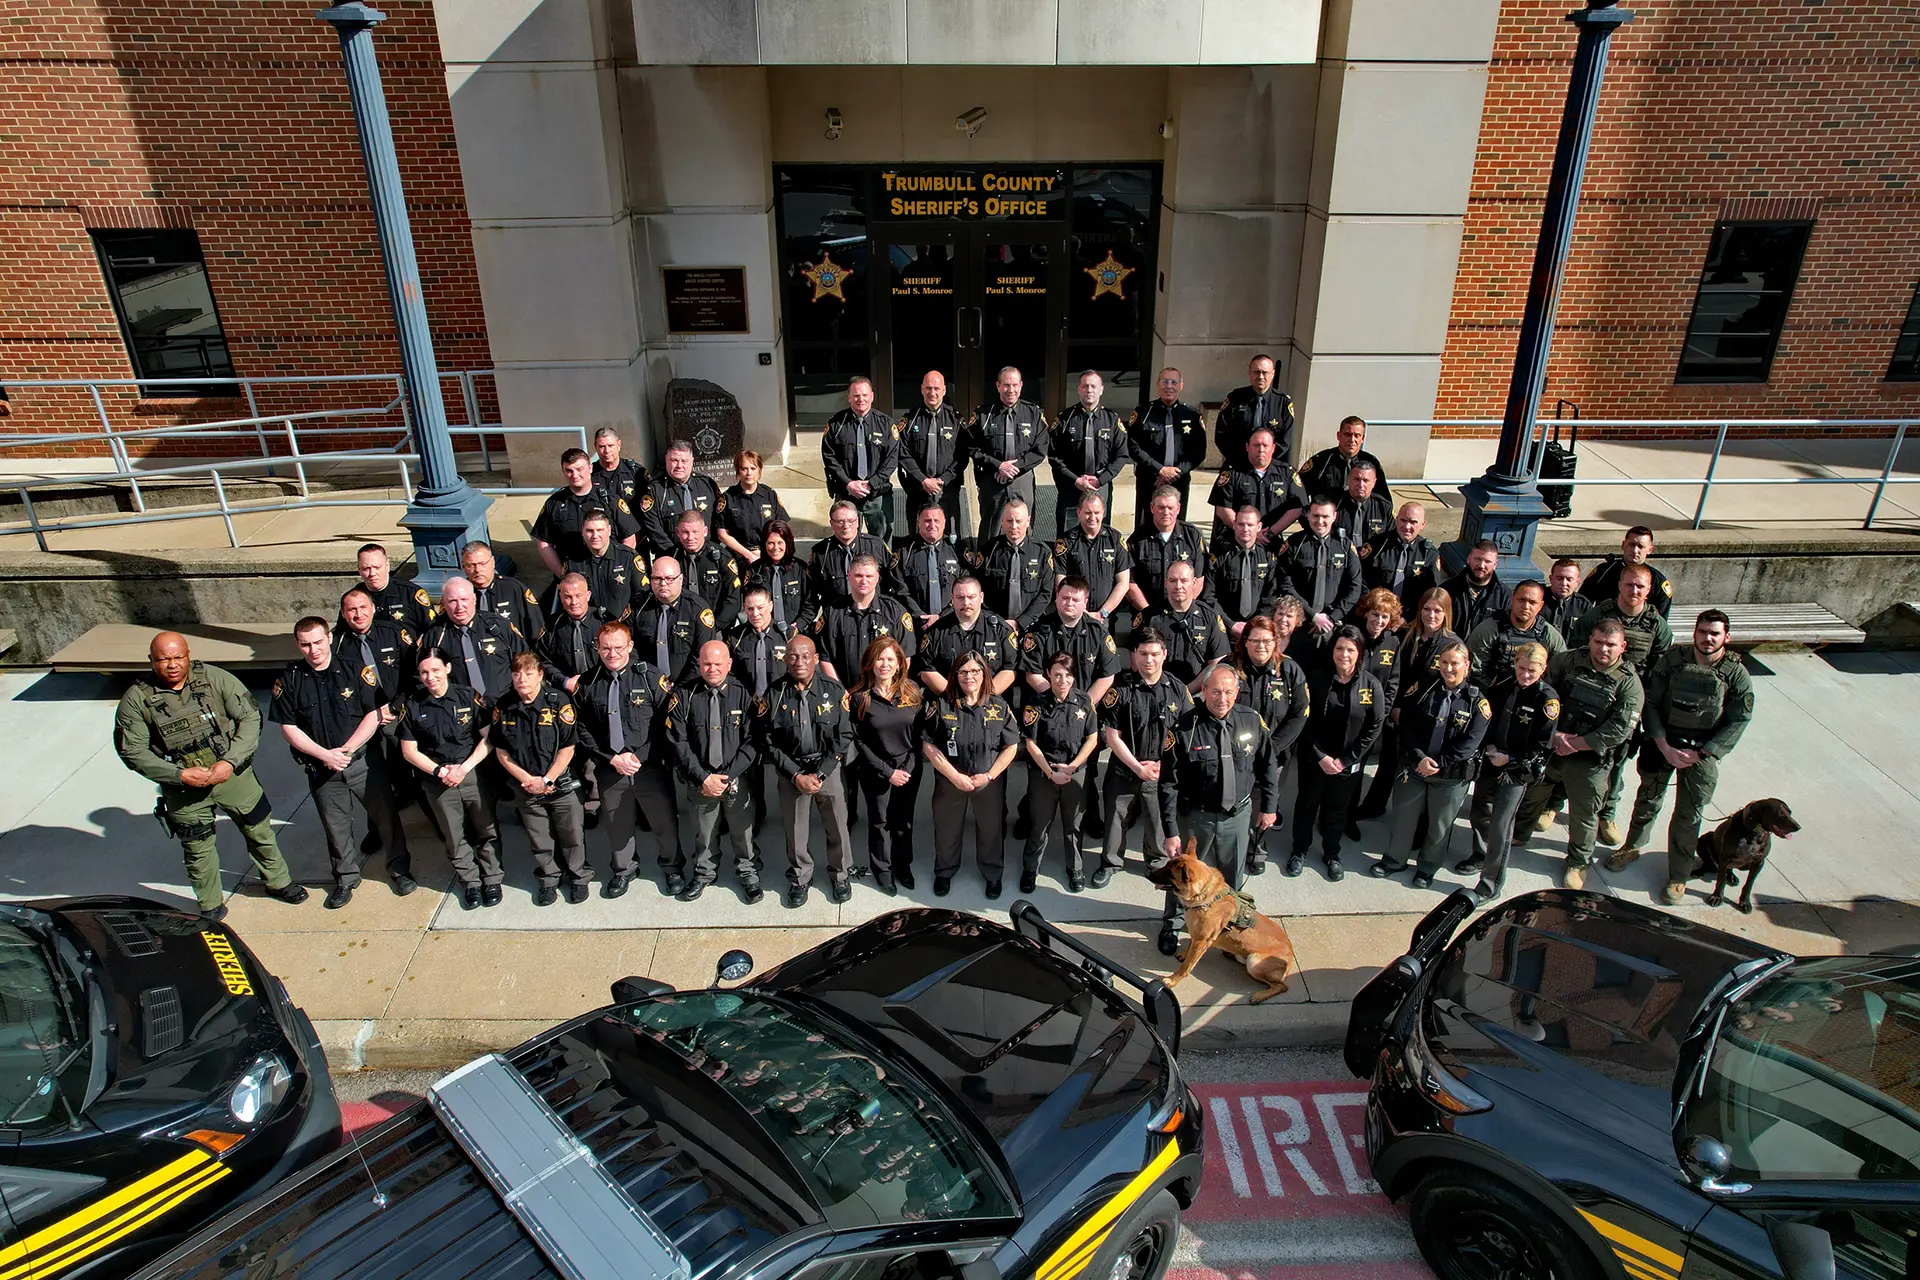 Image of Trumbull County Sheriff's Office